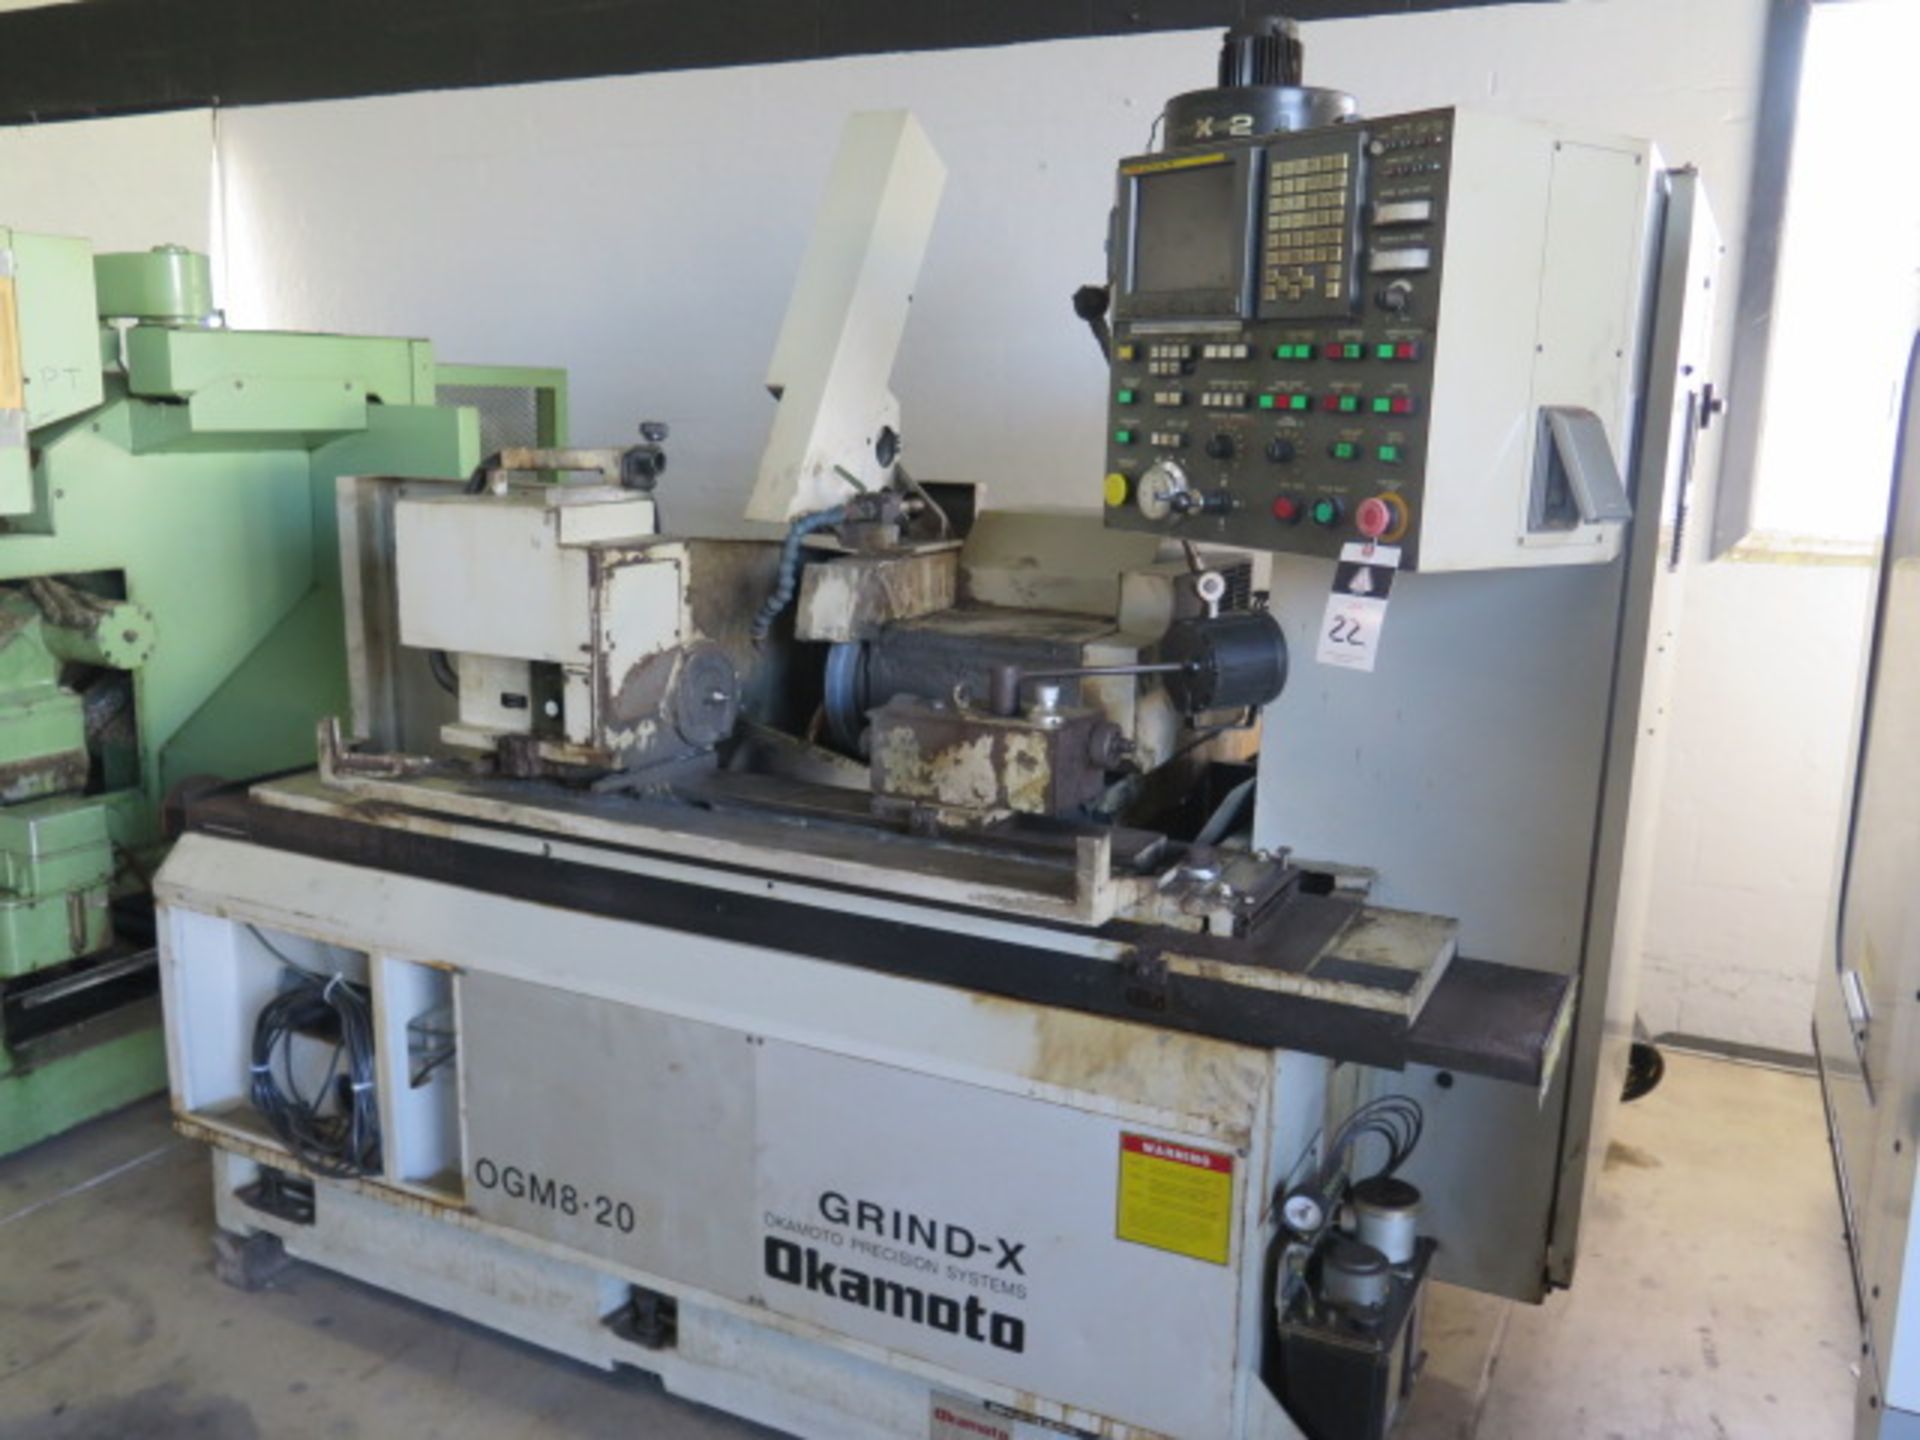 Okamoto “Grind-X” OGM-8-20 UNCB 8” x 20” CNC Grinder s/n 26015 w/ Fanuc Series 21i-TB, SOLD AS IS - Image 2 of 12